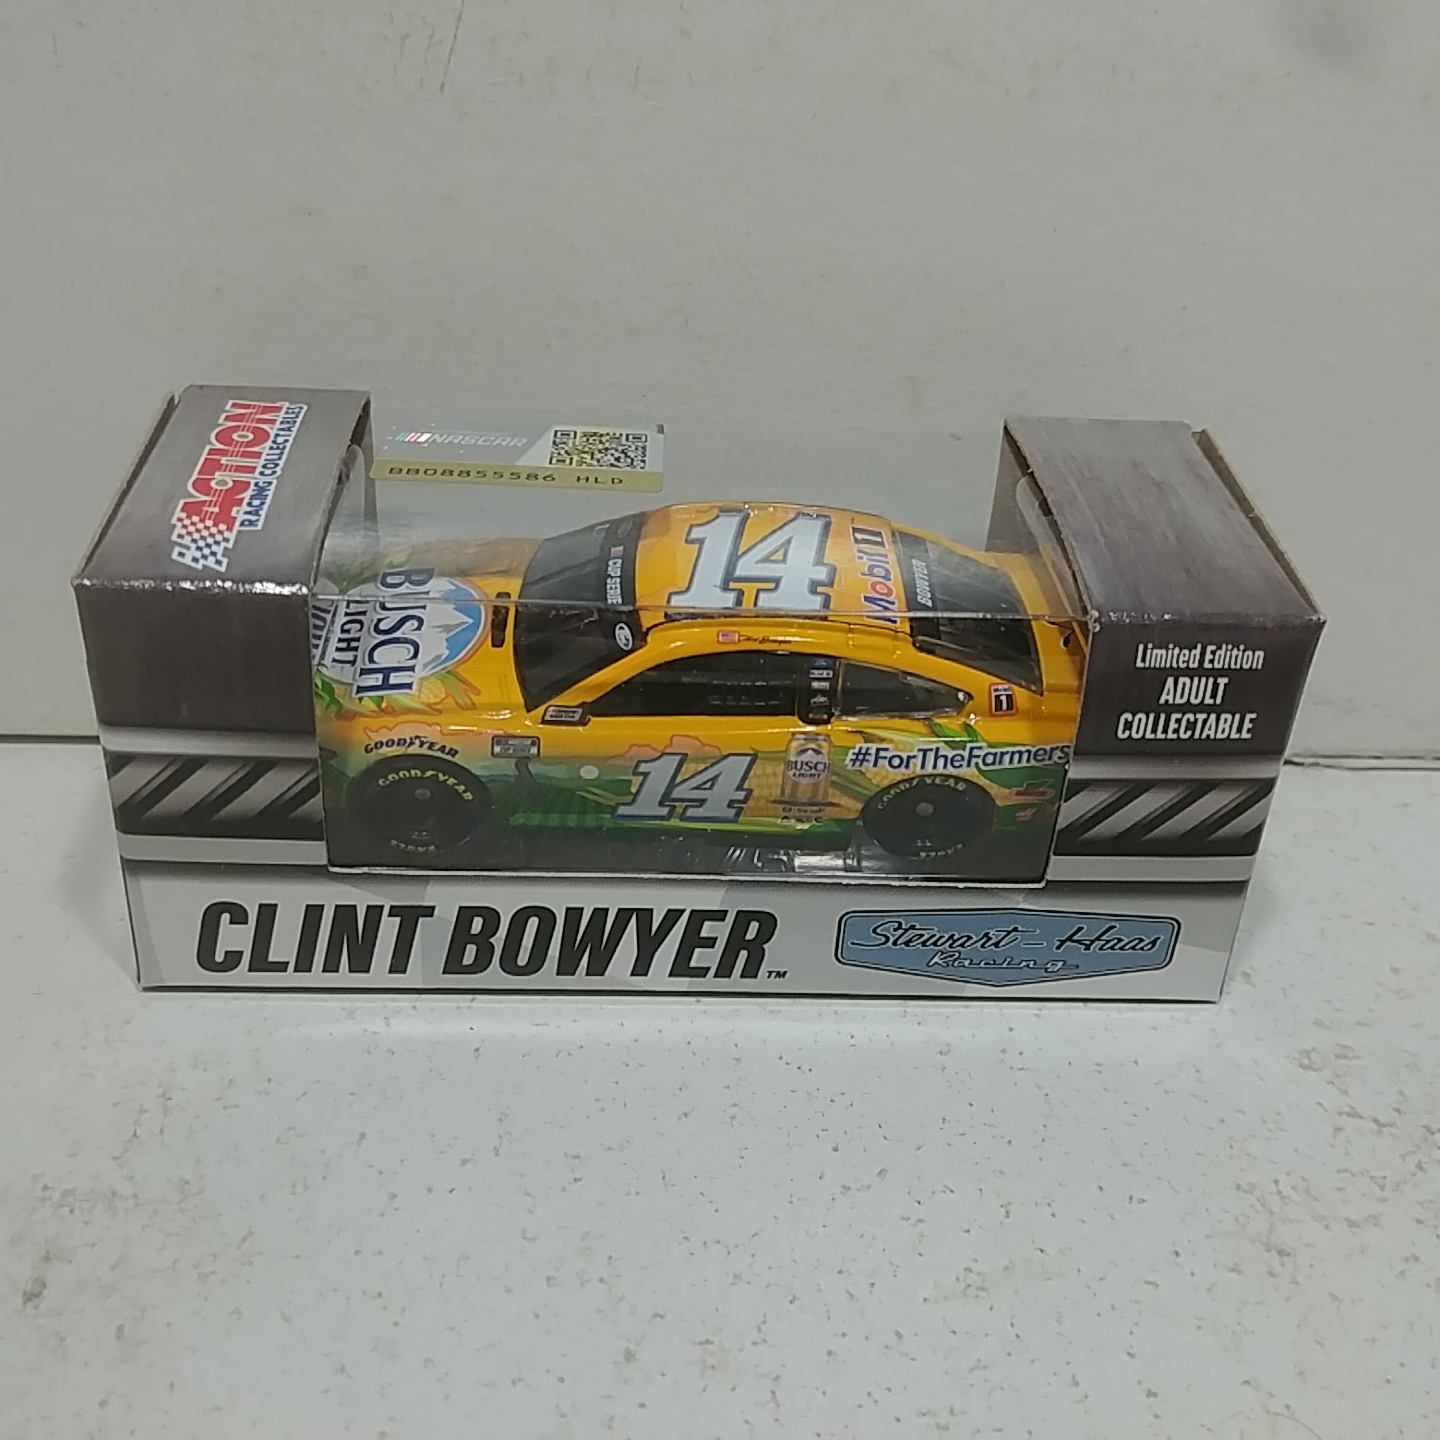 2020 Clint Bowyer 1/64th Busch Light "For The Farmers" Mustang